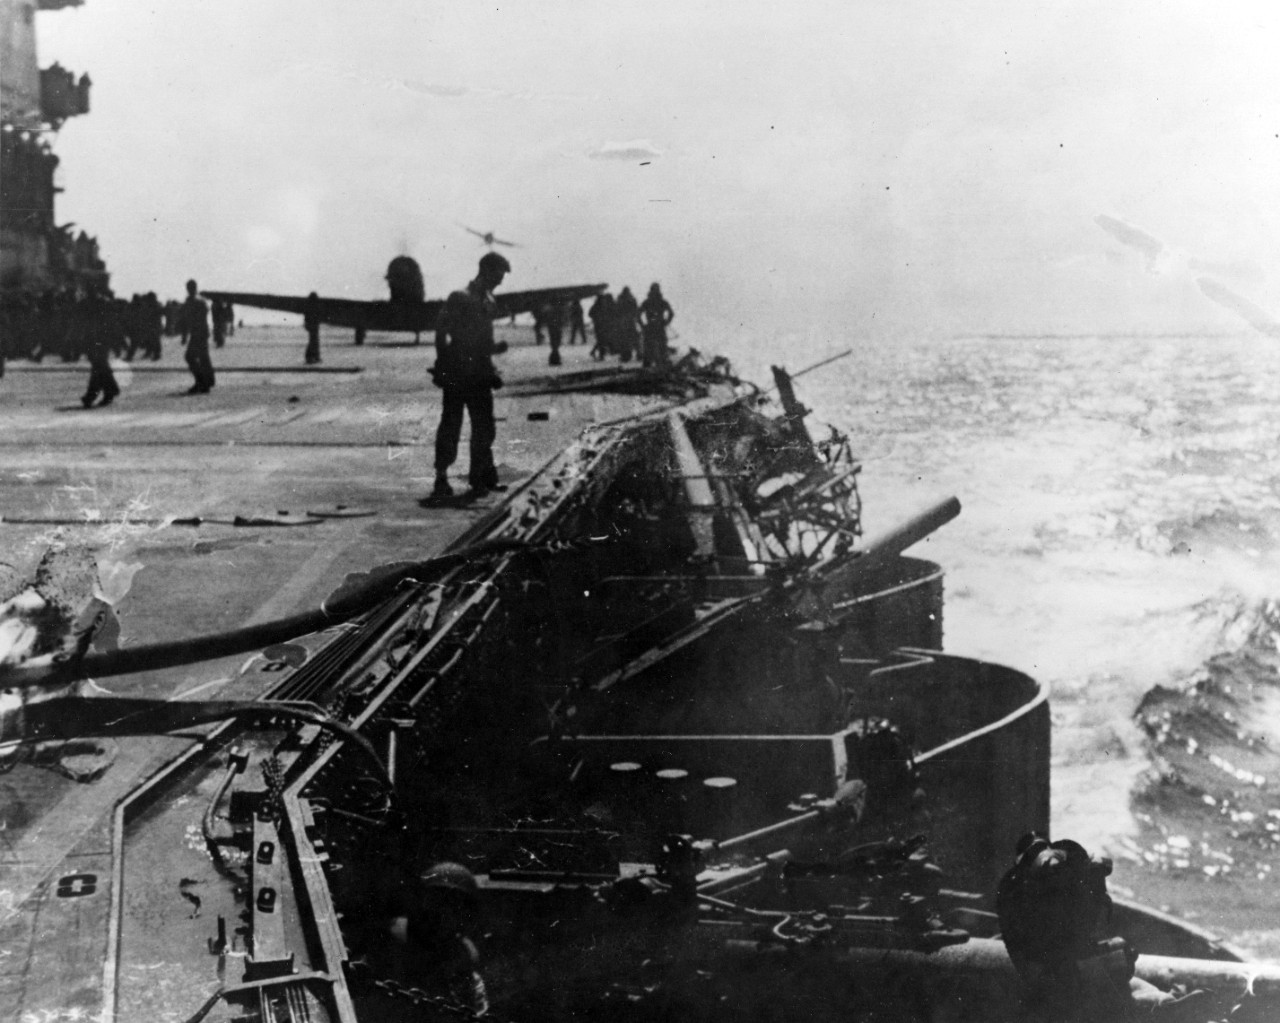 Photo #: 80-G-16806  Battle of the Coral Sea, May 1942